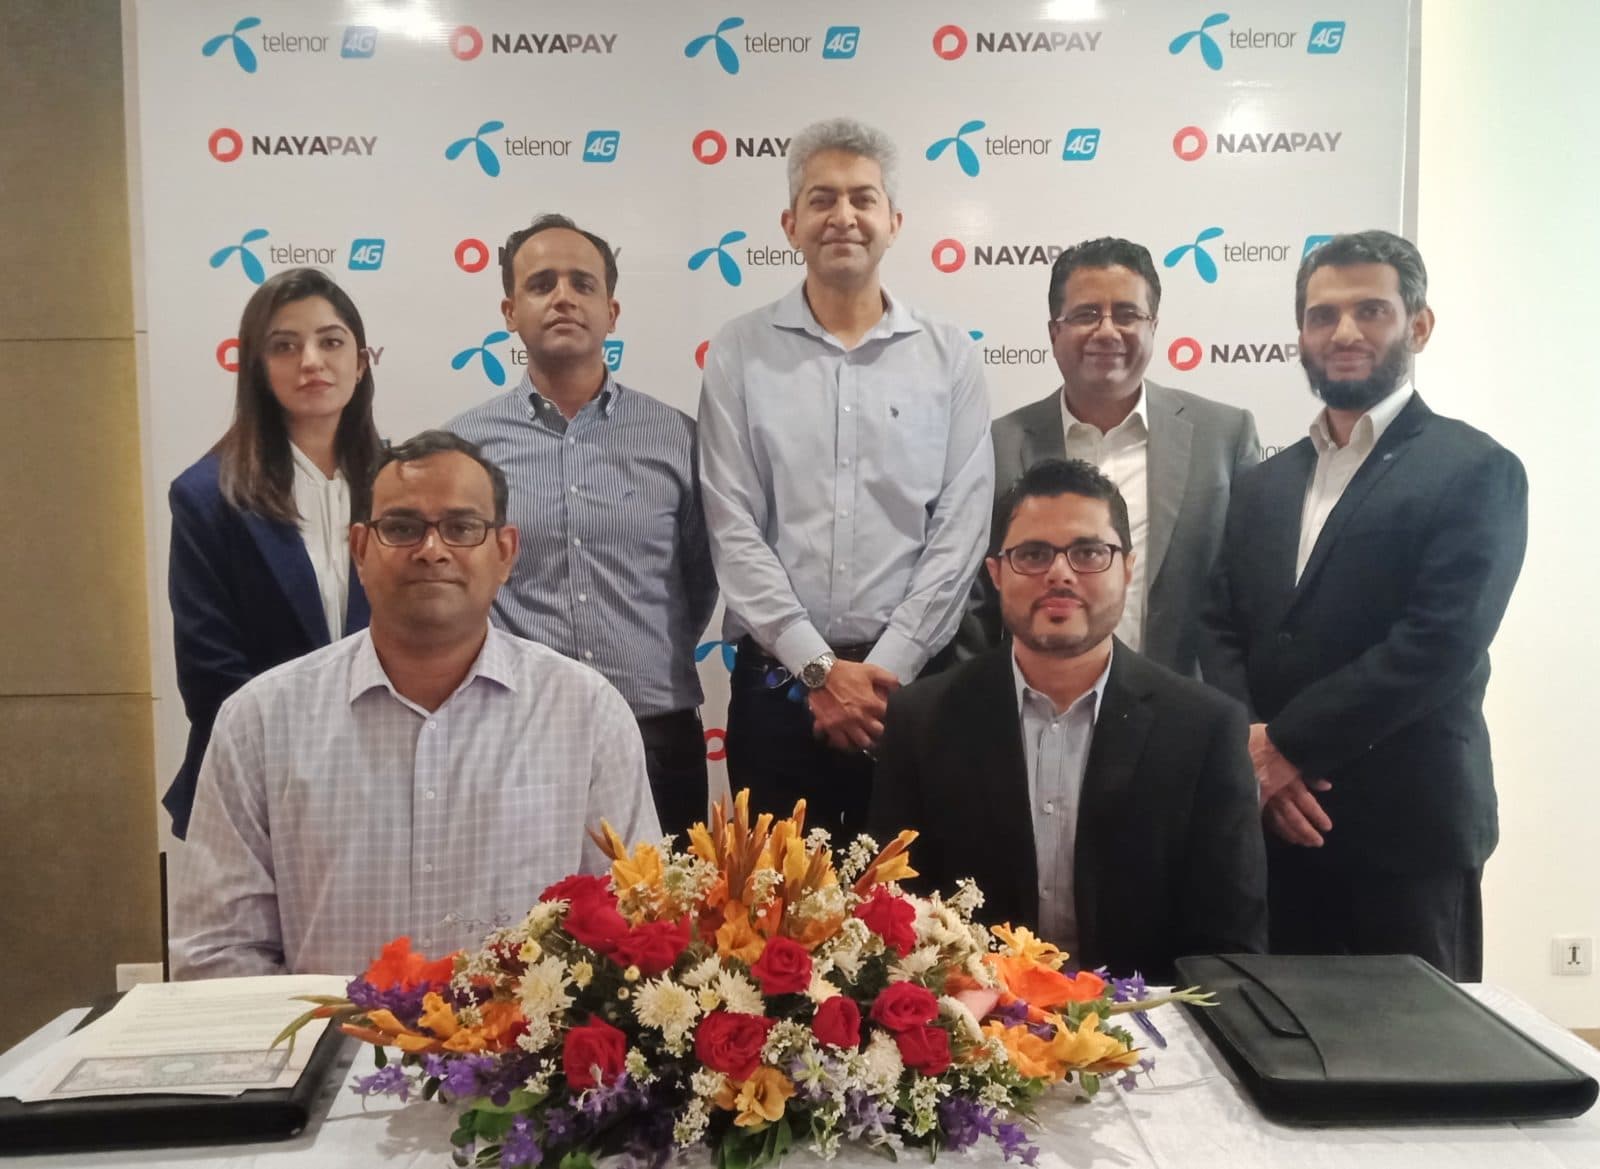 NayaPay and Telenor Pakistan Come Together for Customer Convenience